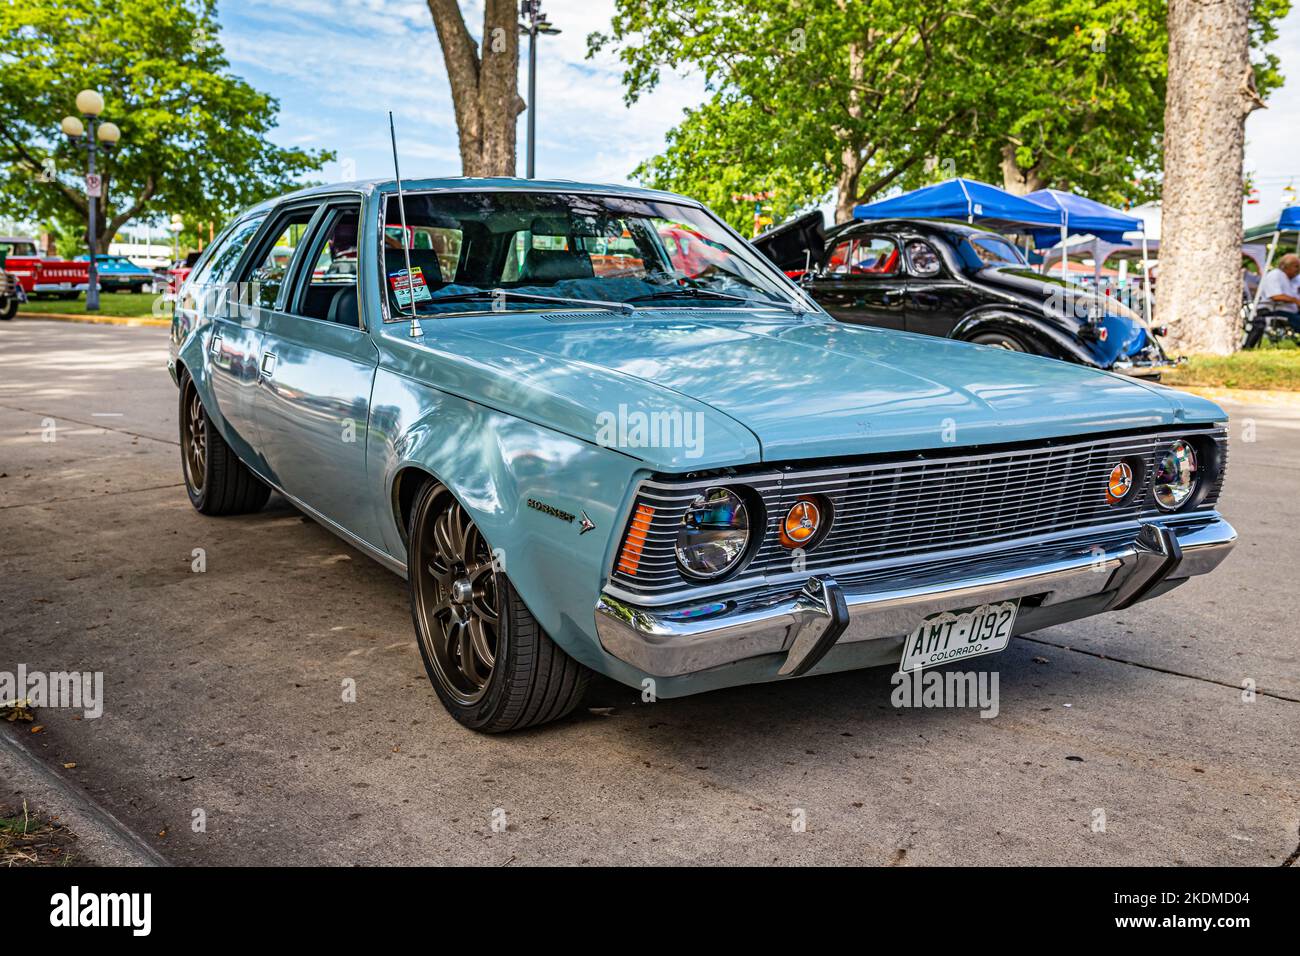 Des Moines, IA - July 01, 2022: Low perspective front corner view of a 1971 AMC Hornet Sportabout Wagon at a local car show. Stock Photo